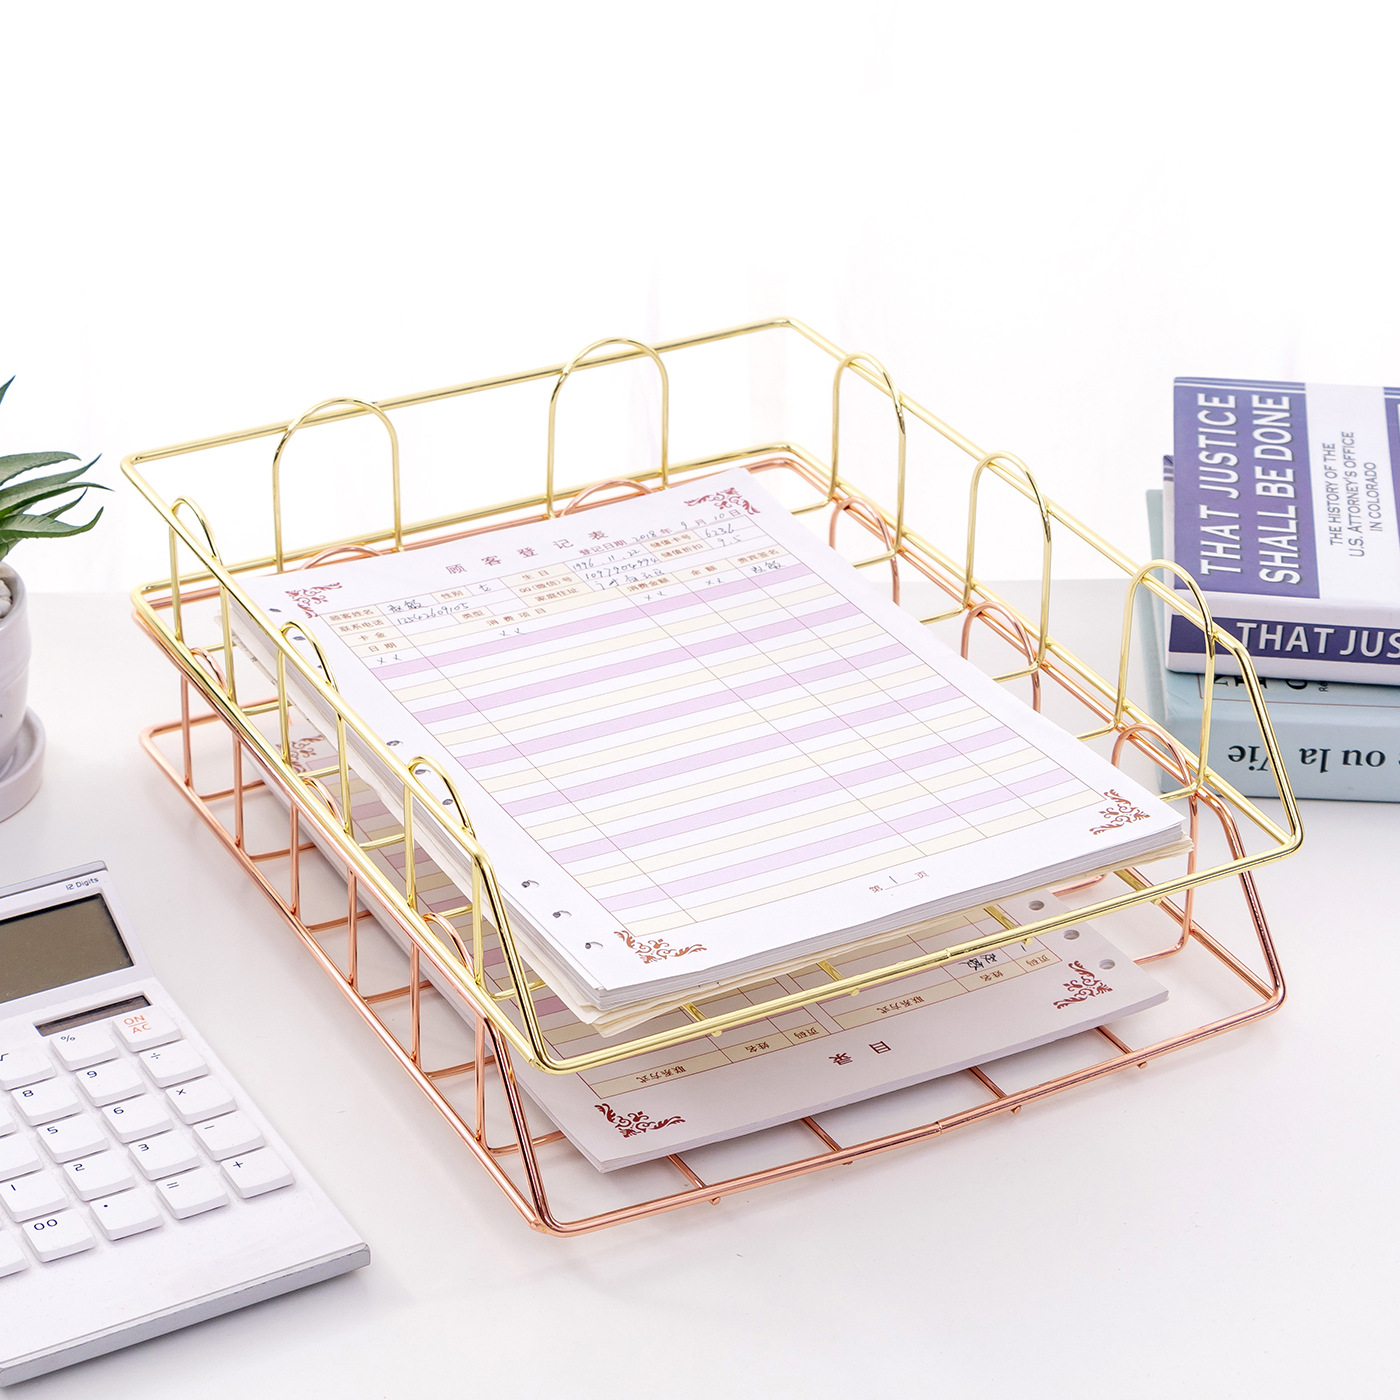 Find MingQiang Single-layer Stackable File Rack Nordic Style Metal Rack Desktop Organizer Home Office Desktop Storage Supplies for Sale on Gipsybee.com with cryptocurrencies